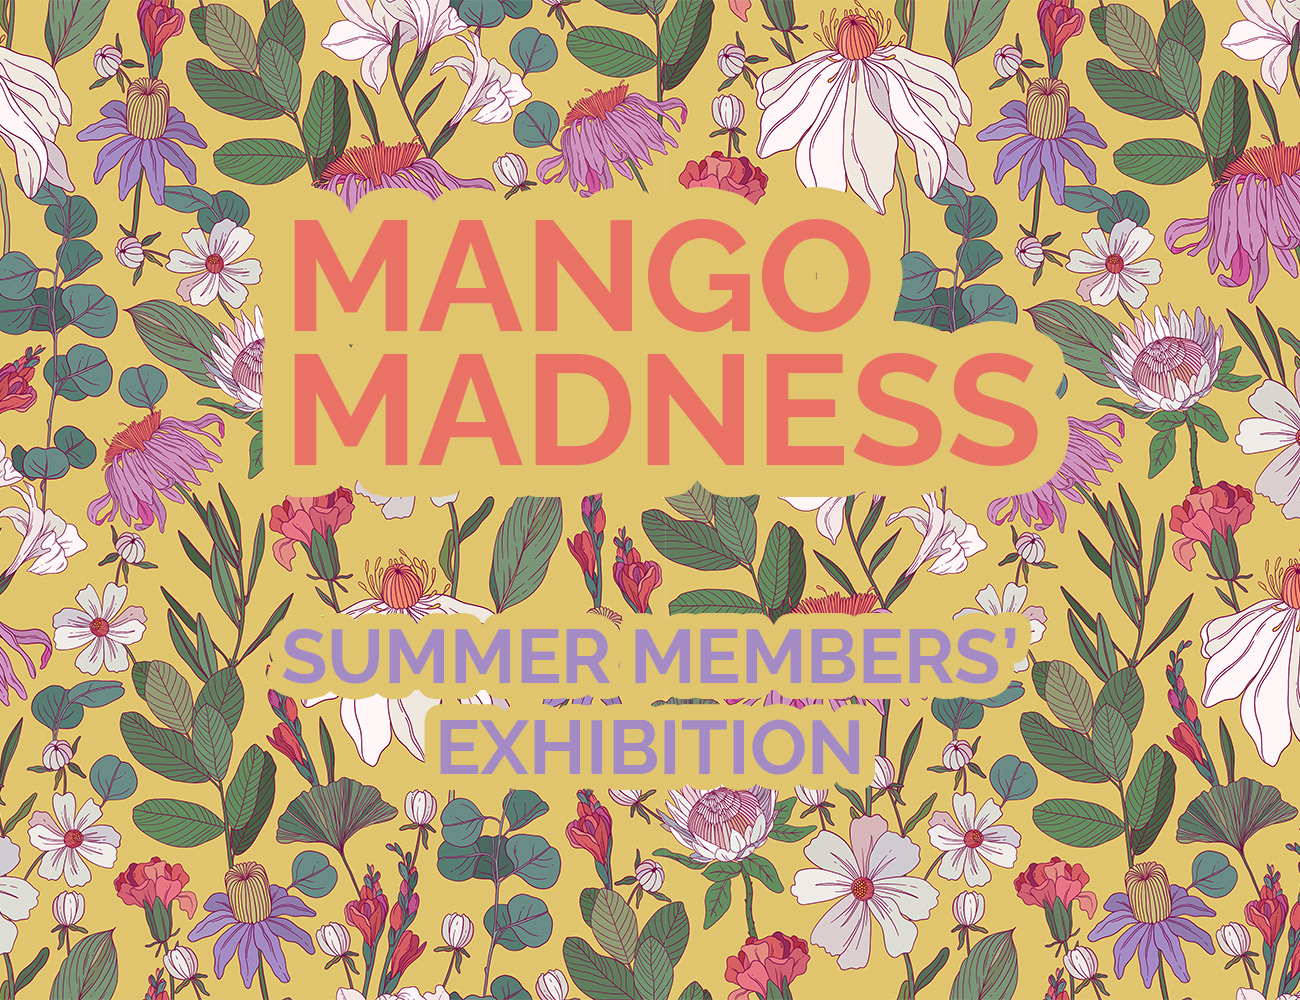 Our annual summer exhibition is an expression of gratitude – for the artists that inspire us, and for the island that inspires them. That generosity is gloriously embodied in the fruit we love like no other in the Keys. Mangoes fill our trees each spring until they grow pregnant with their weight, thumping to the ground in summer to be gathered, enjoyed and shared with neighbors like golden currency.